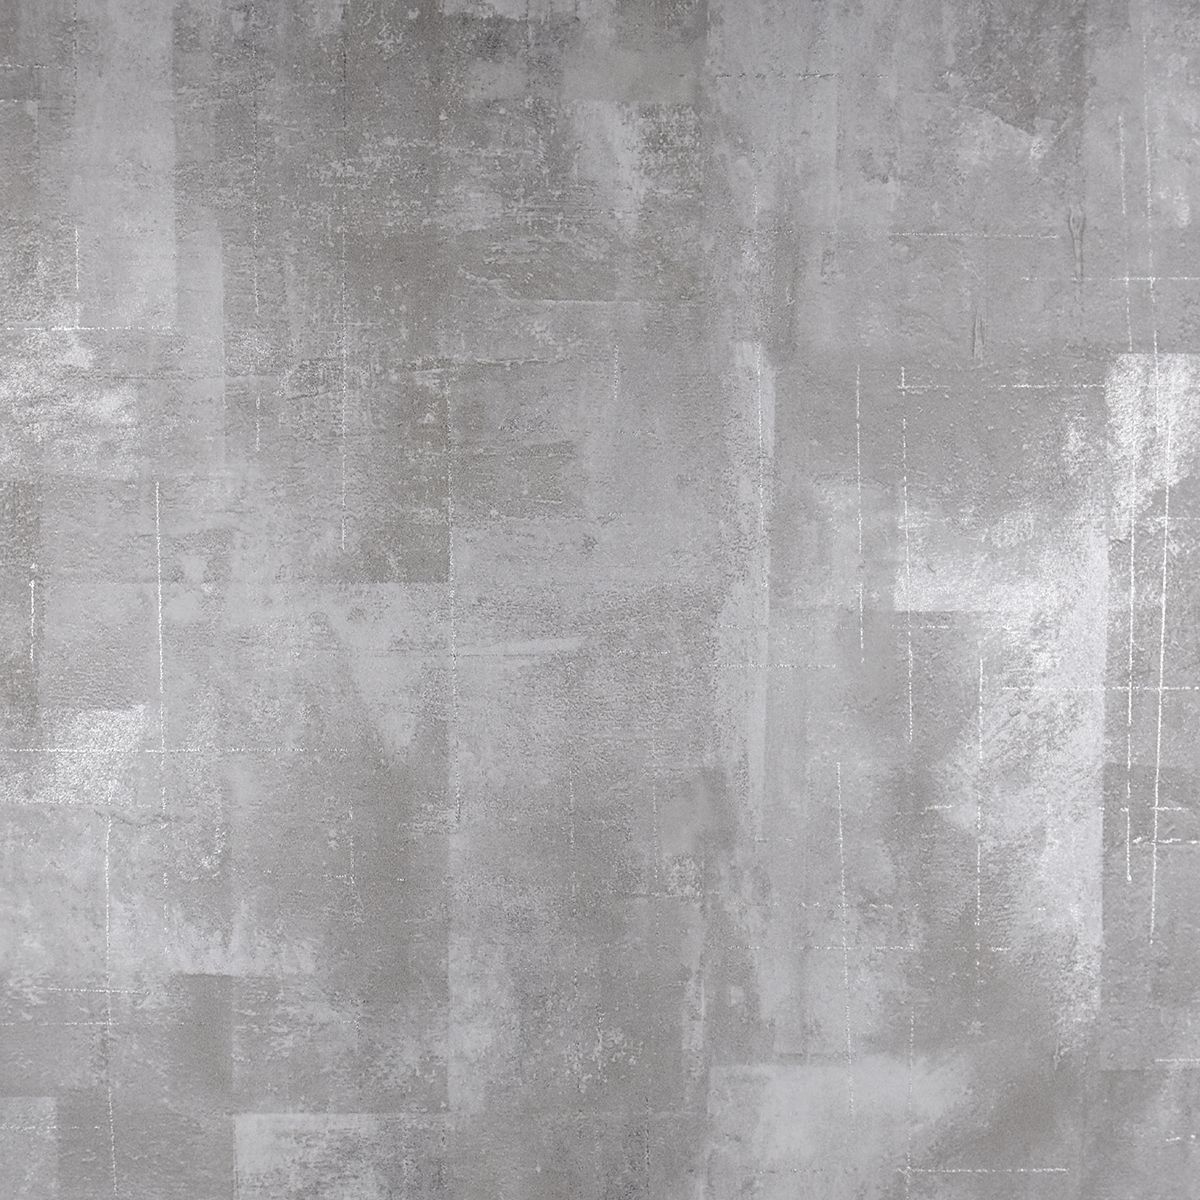 2927 20402 – Ozone Silver Texture Wallpaper  Brewster Within Newest Textured Metallic Wall Art (View 18 of 20)